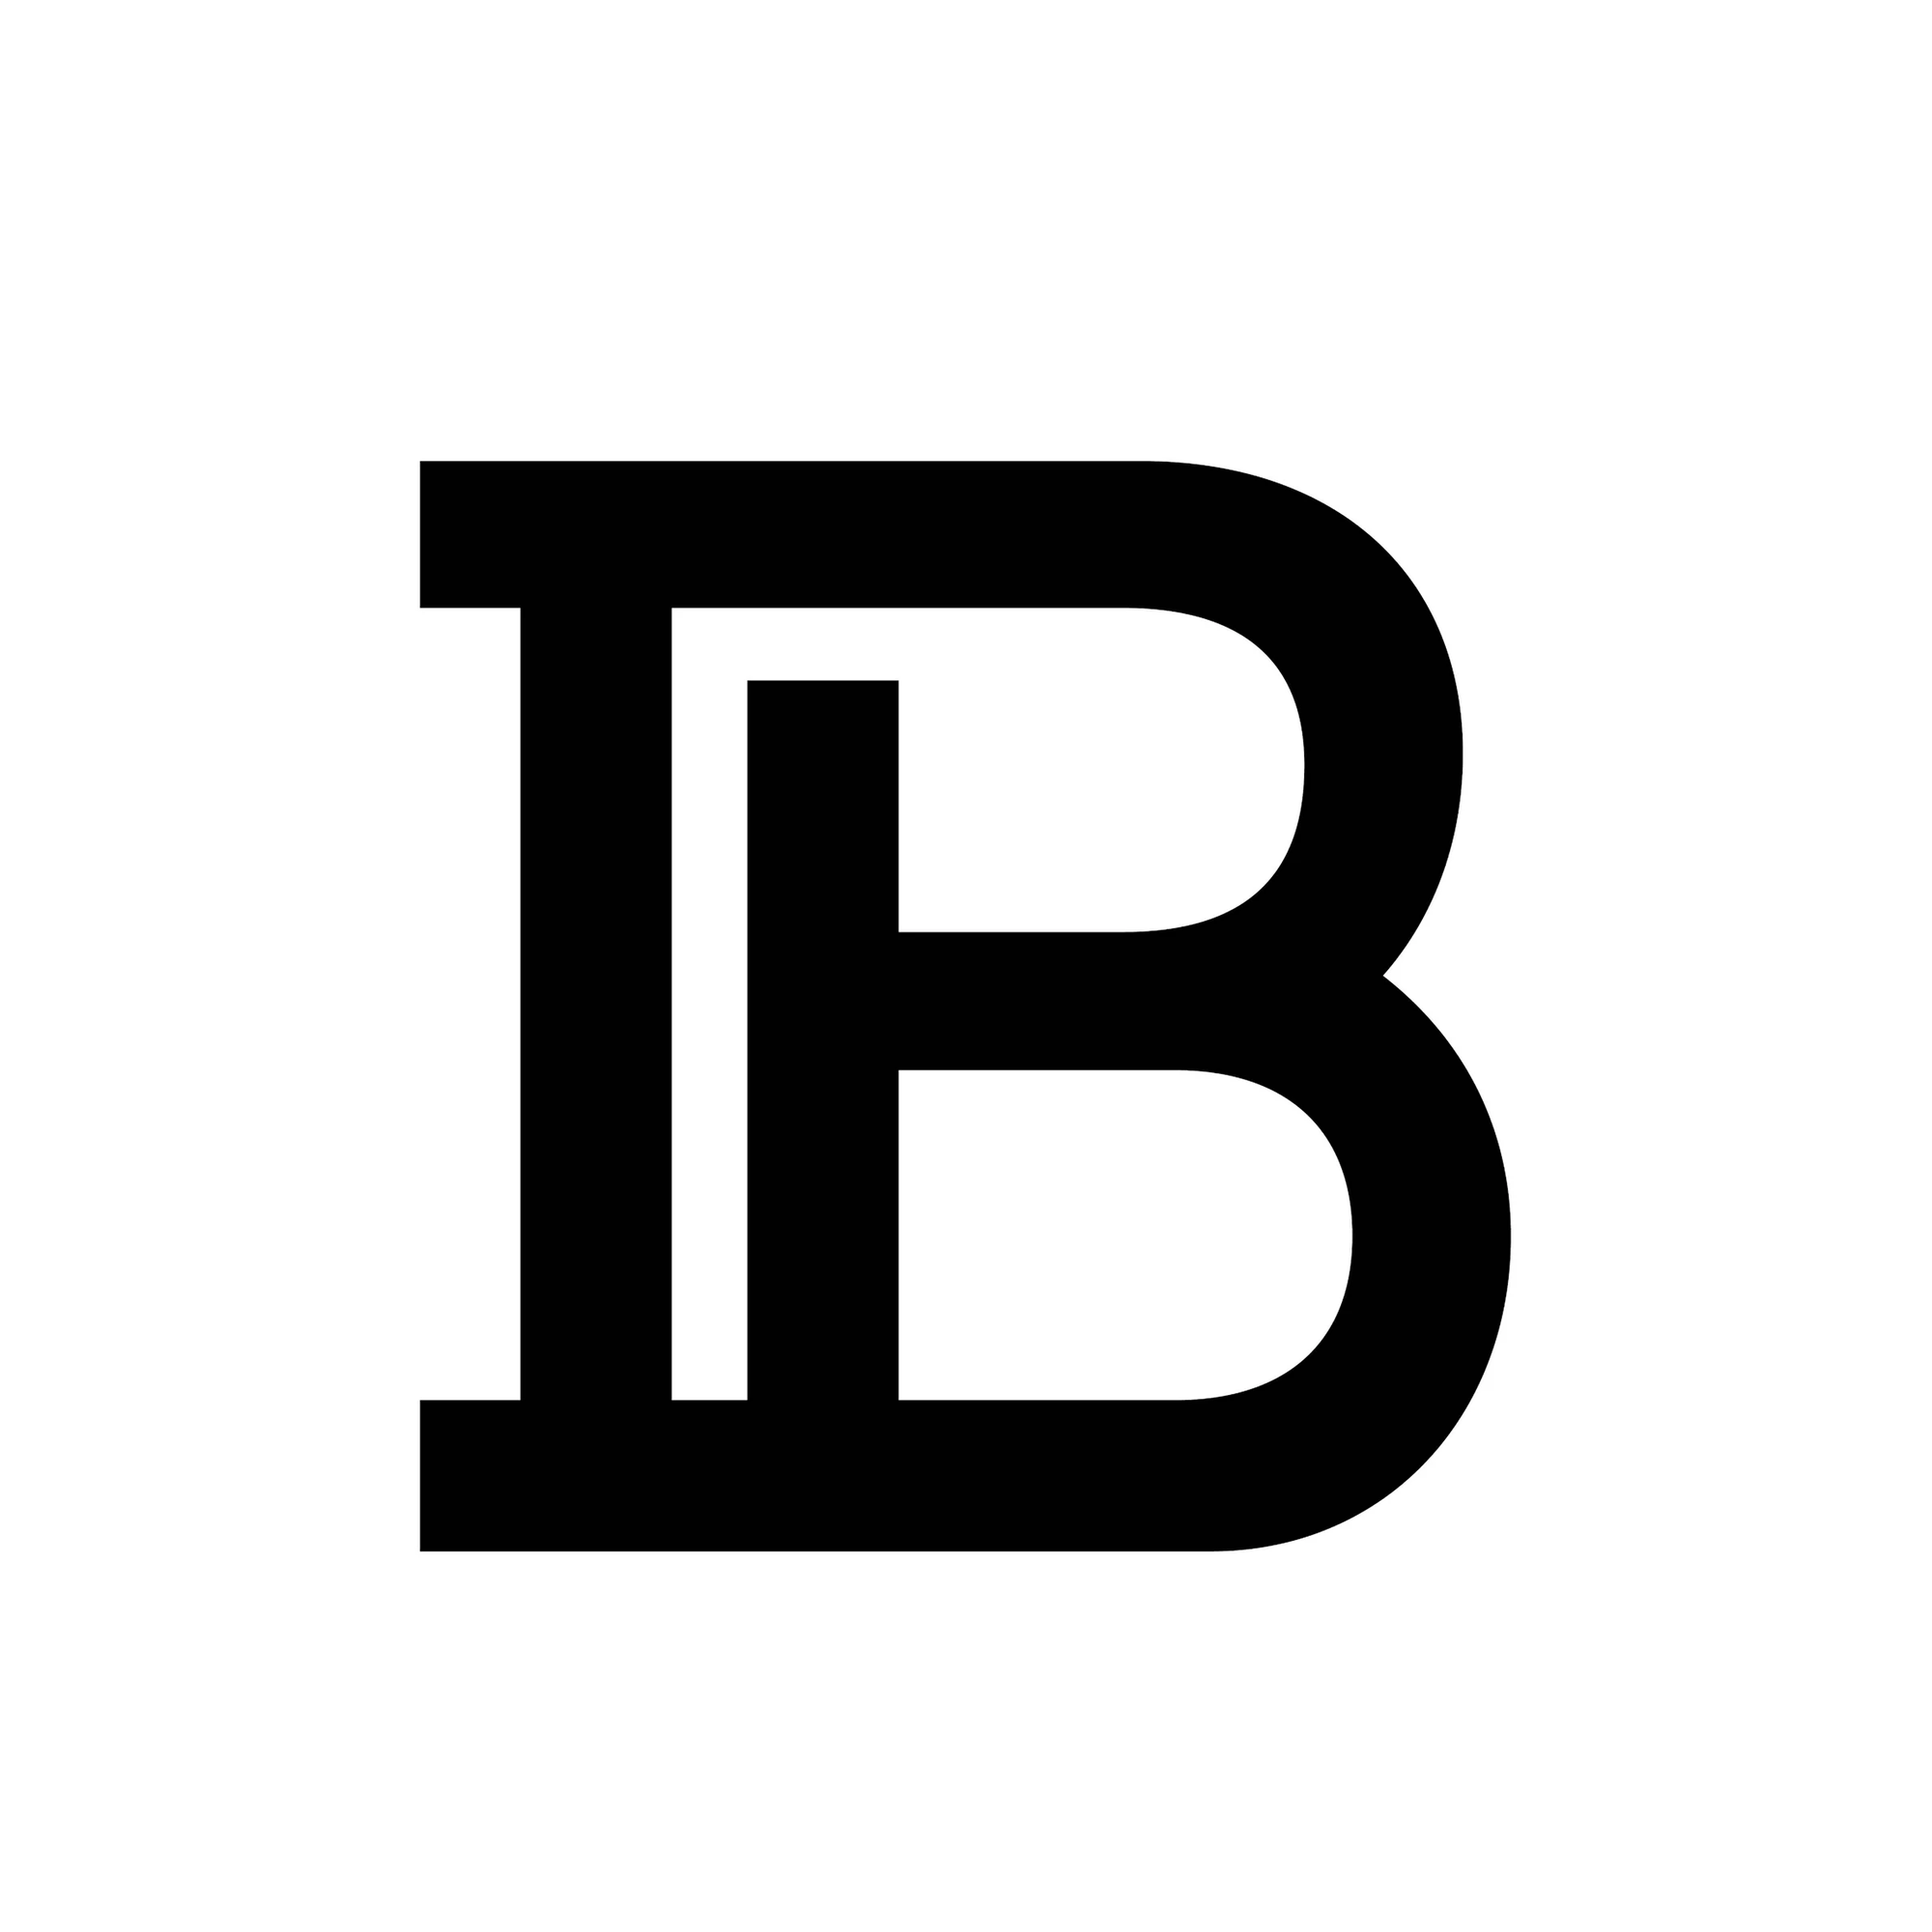 Brand New: New Logo for Balmain by Adulte Adulte